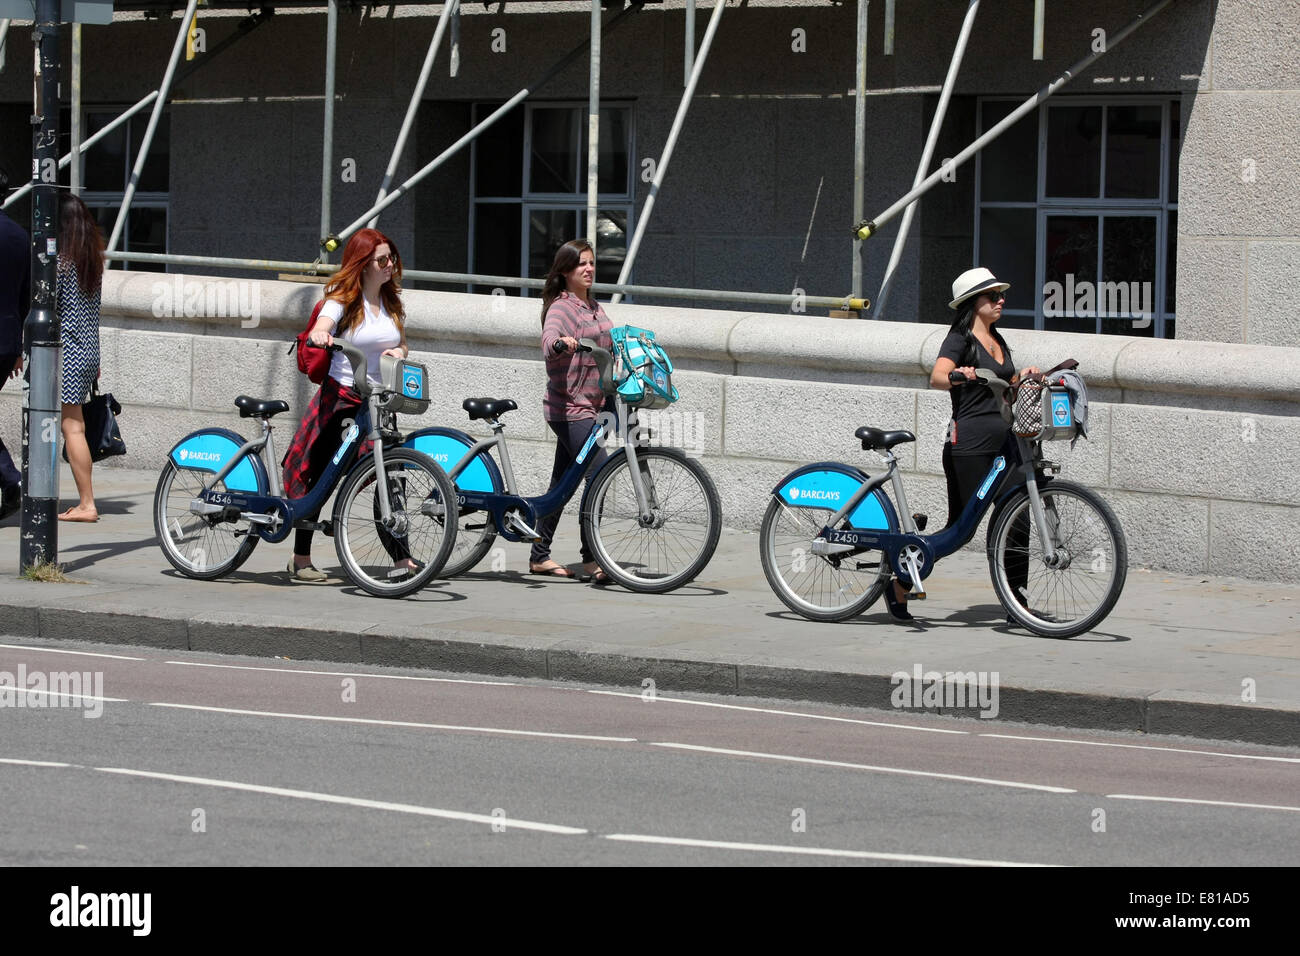 Three females walking bicycles along a pavement in London Stock Photo